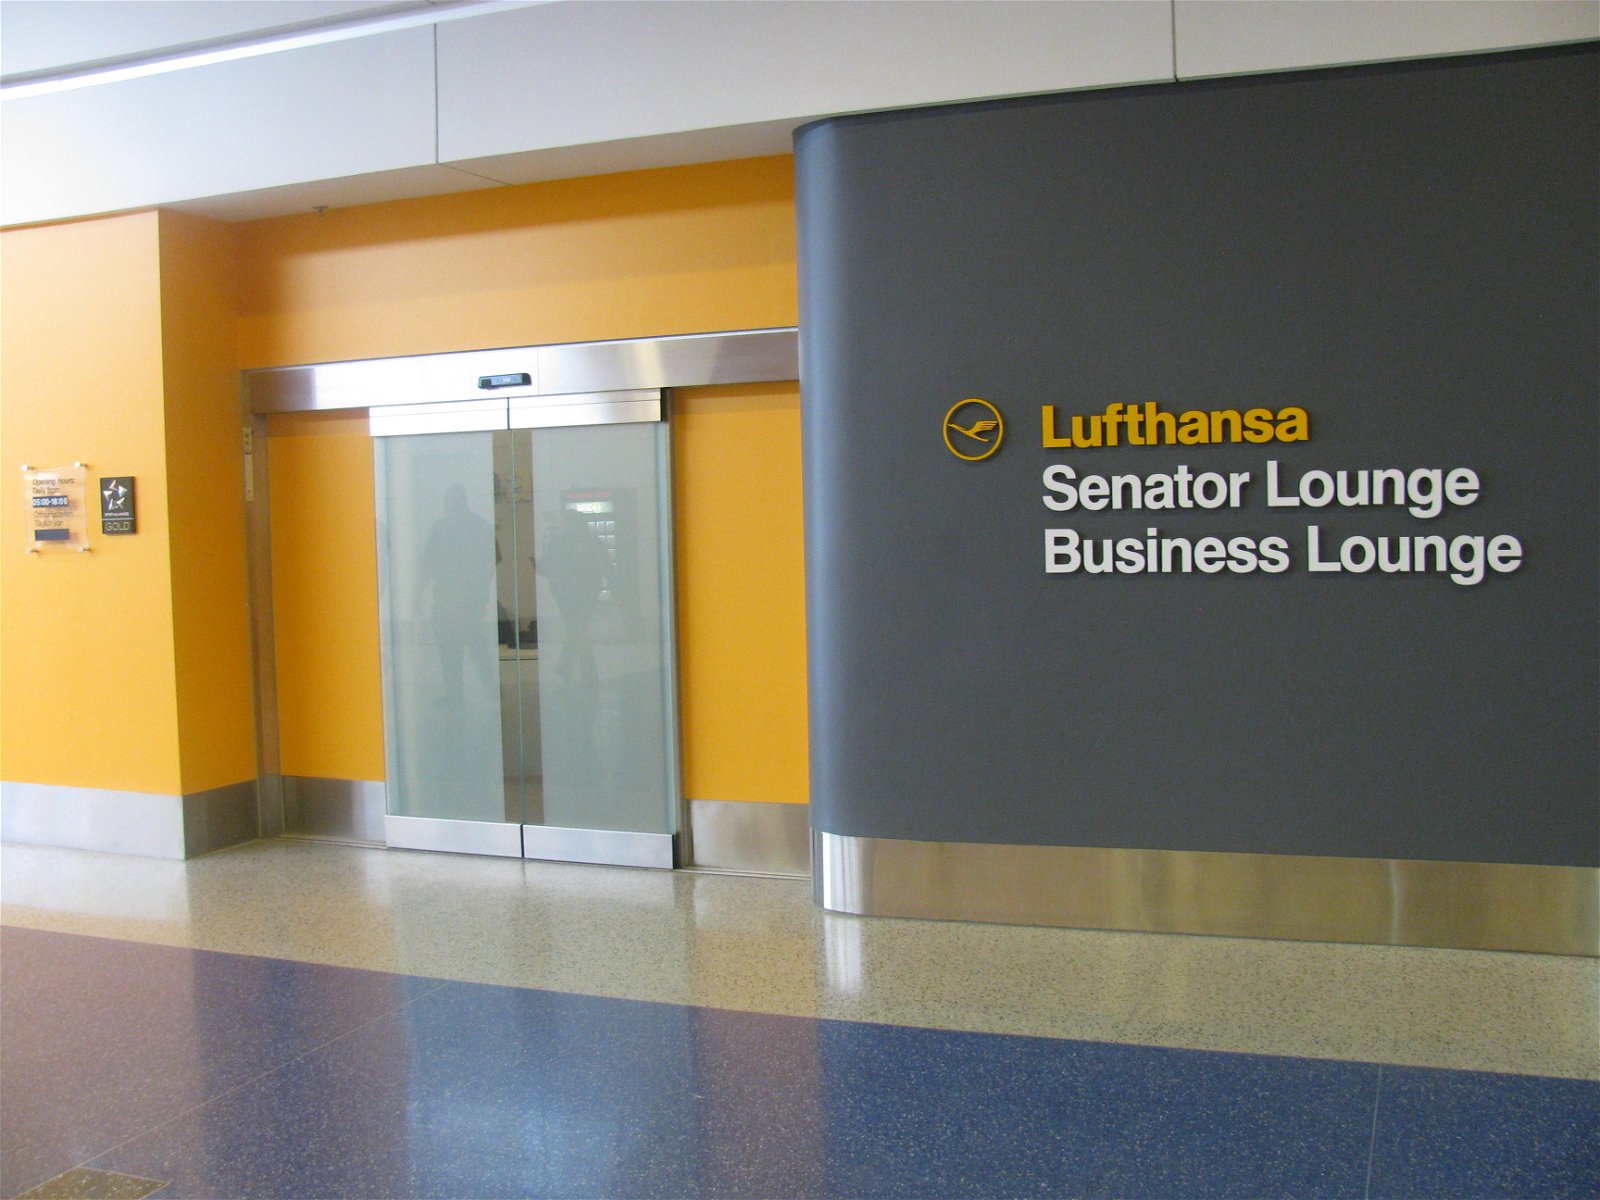 Entry to the lounge